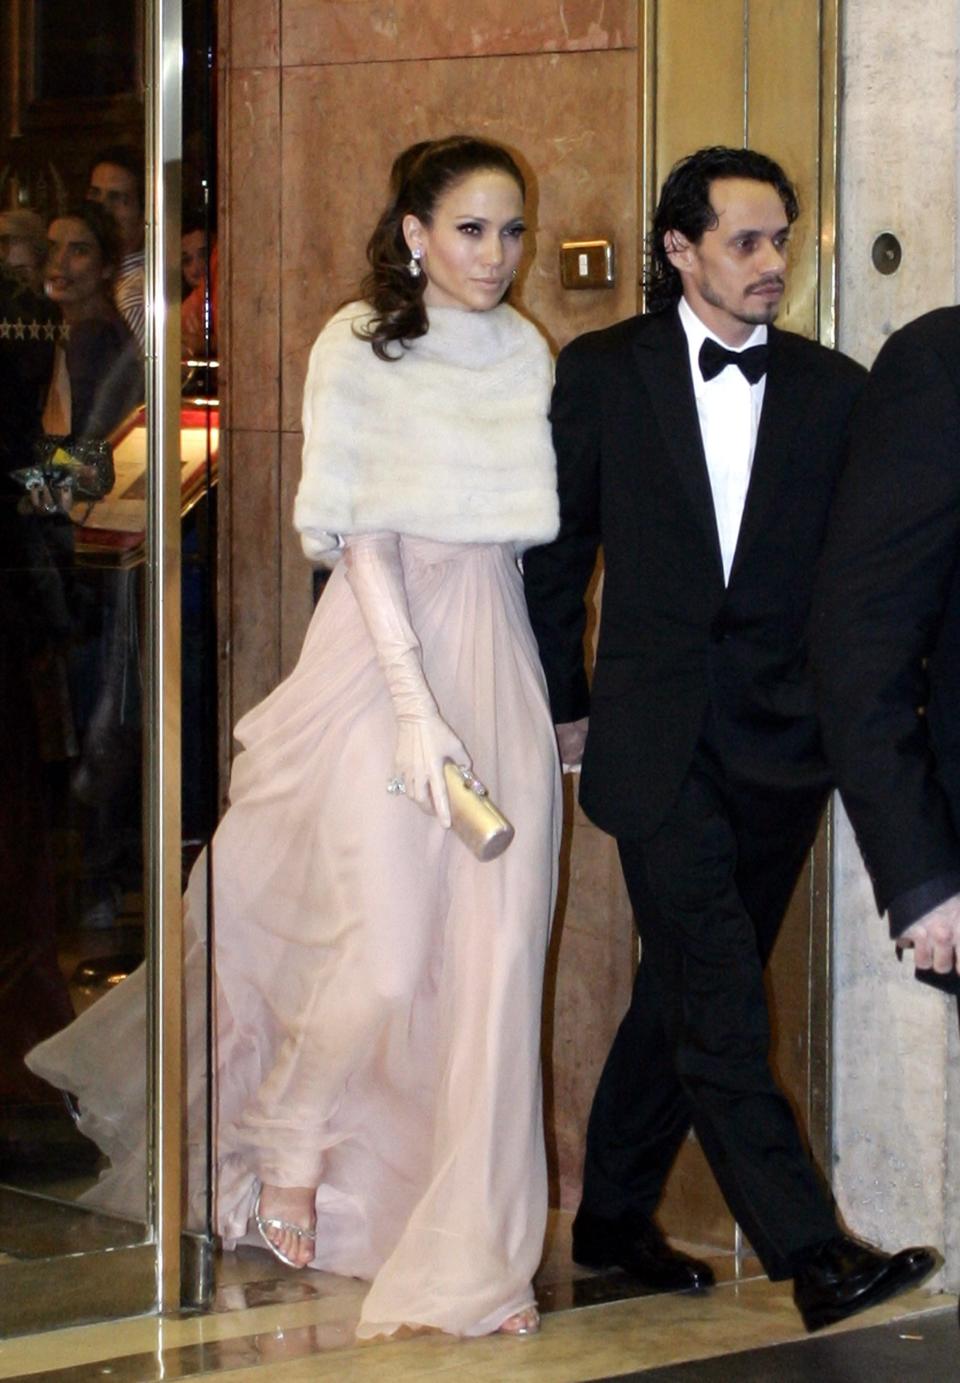 Jennifer Lopez and her then-husband Marc Anthony leaving a hotel.